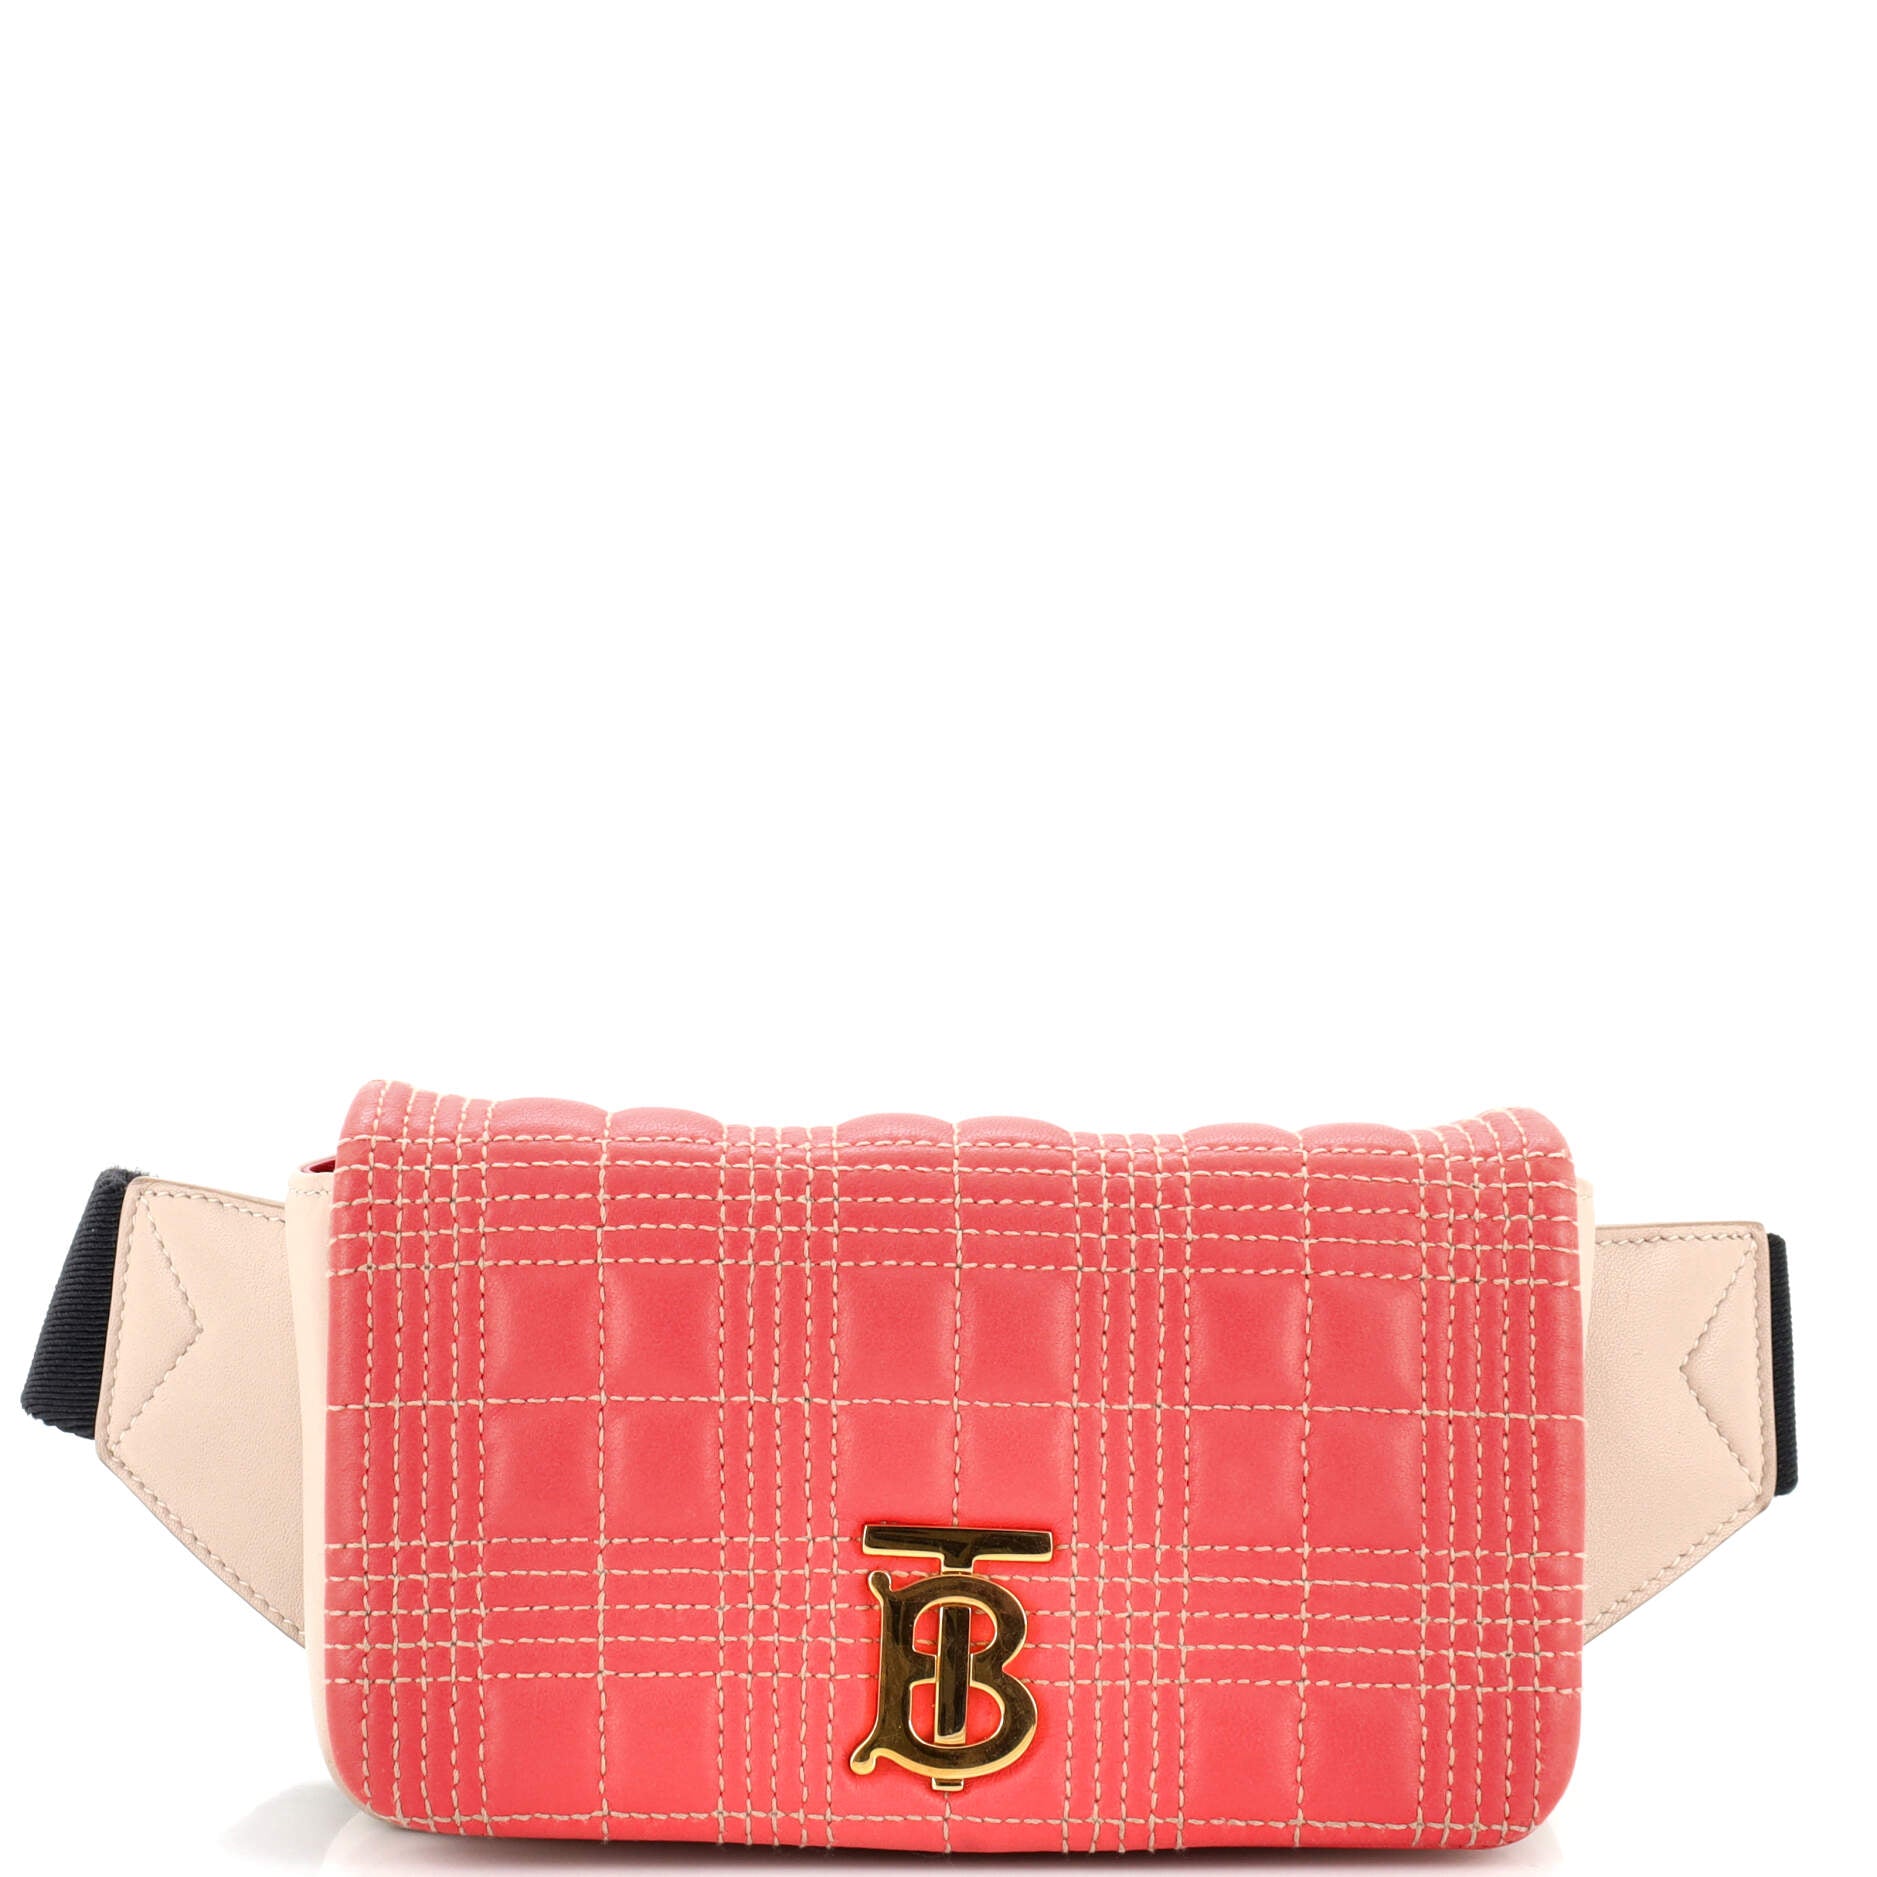 Lola Bum Bag Quilted Lambskin